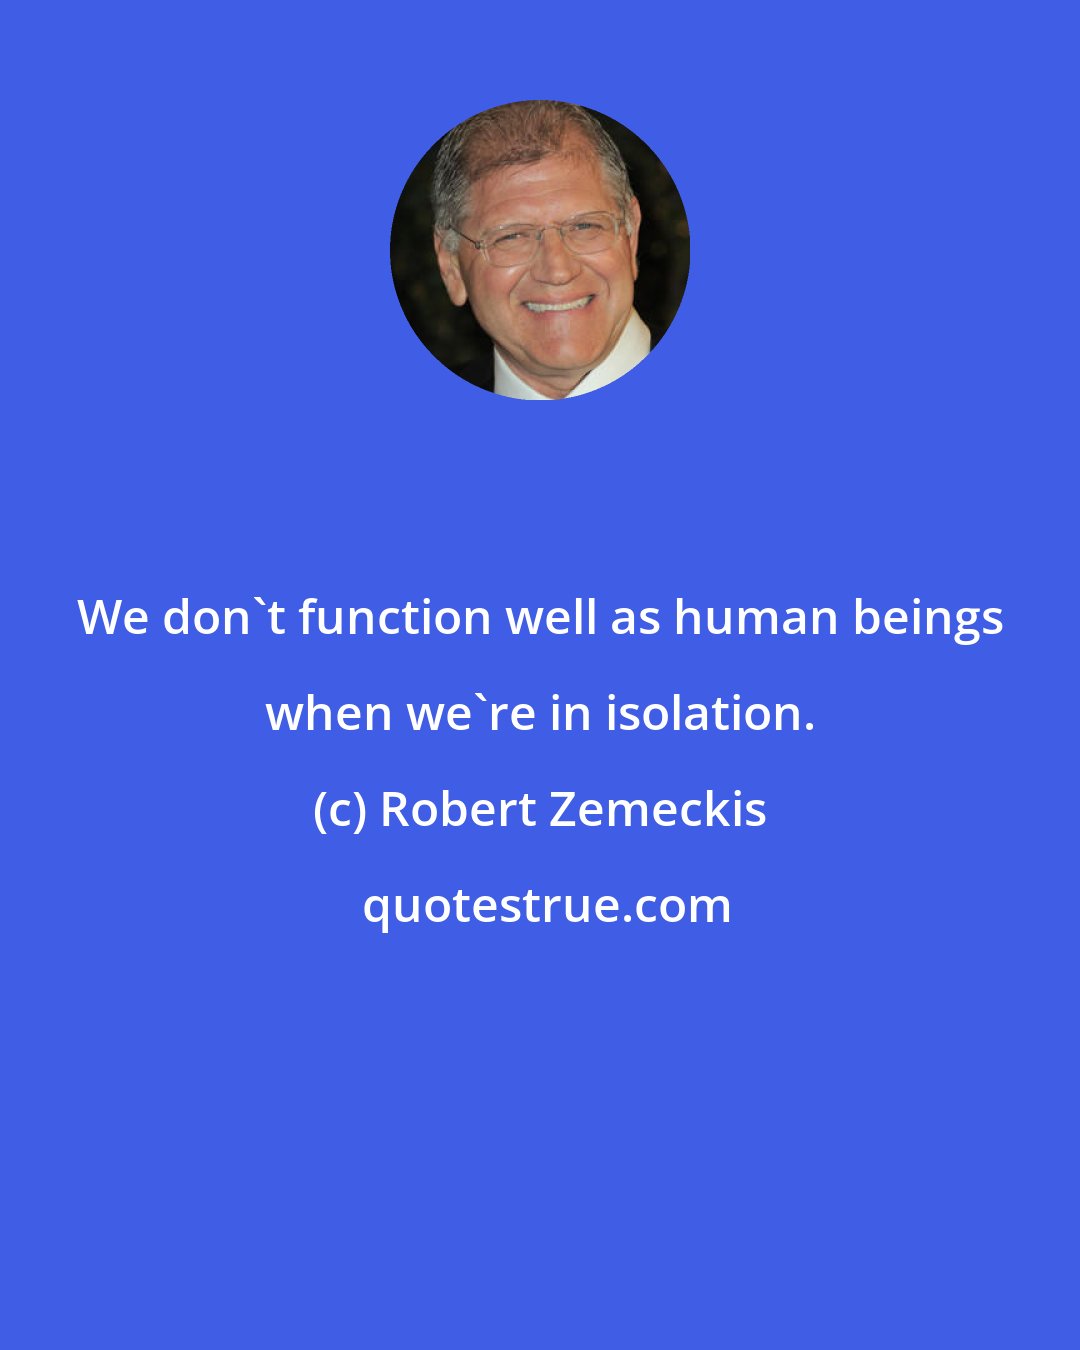 Robert Zemeckis: We don't function well as human beings when we're in isolation.